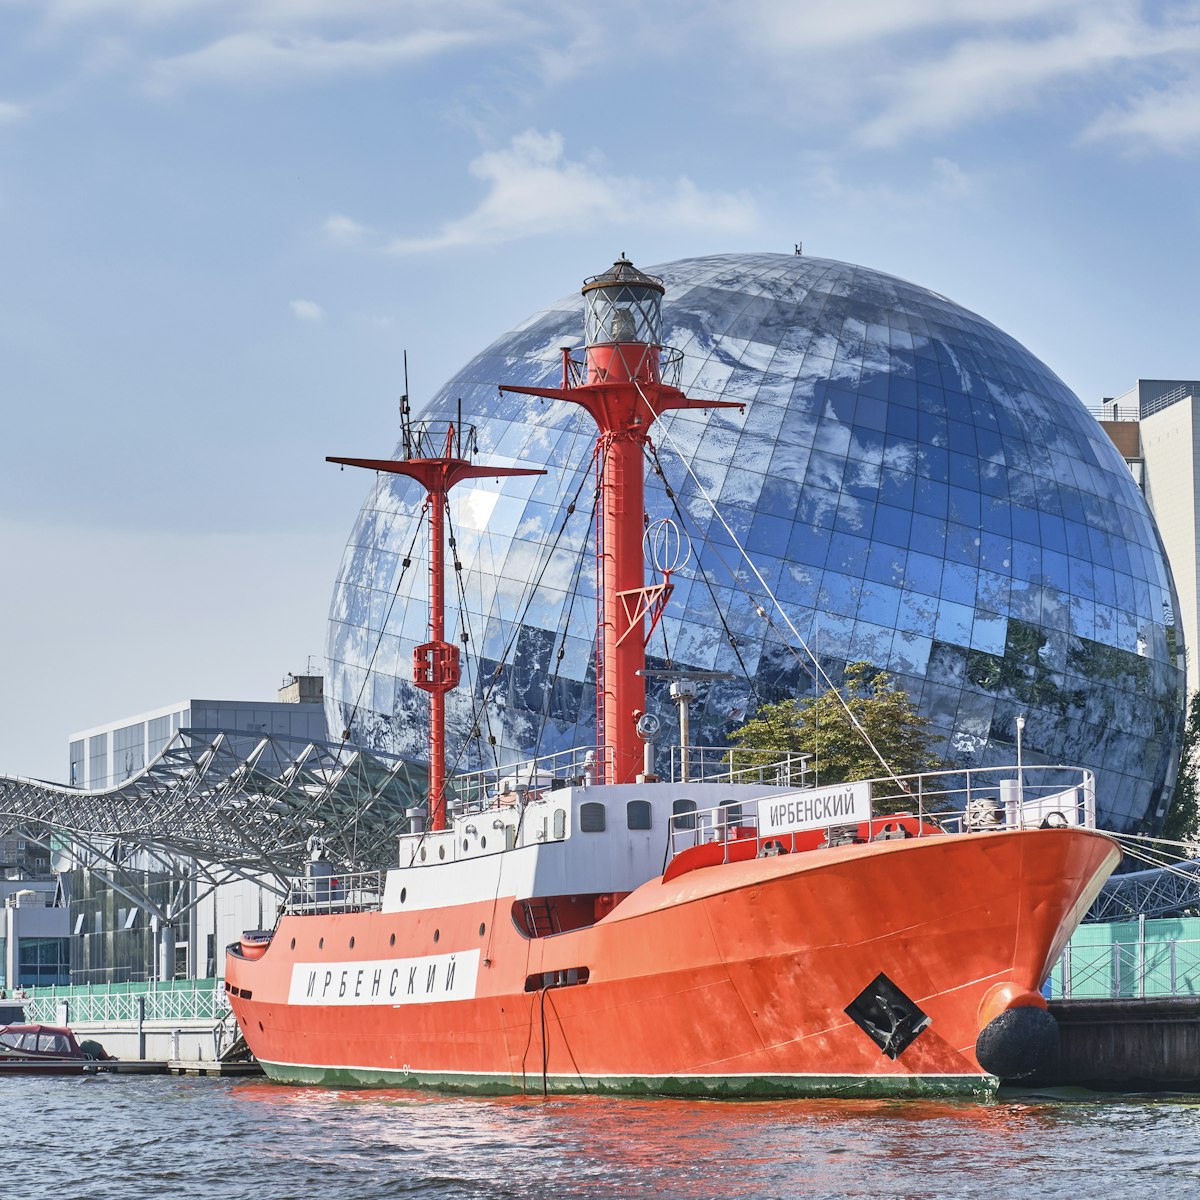 Irbensky, floating lighthouse, museum ship in exposition of Museum of World Ocean over backdrop of Planet Ocean exhibition building on the Pregolya River.